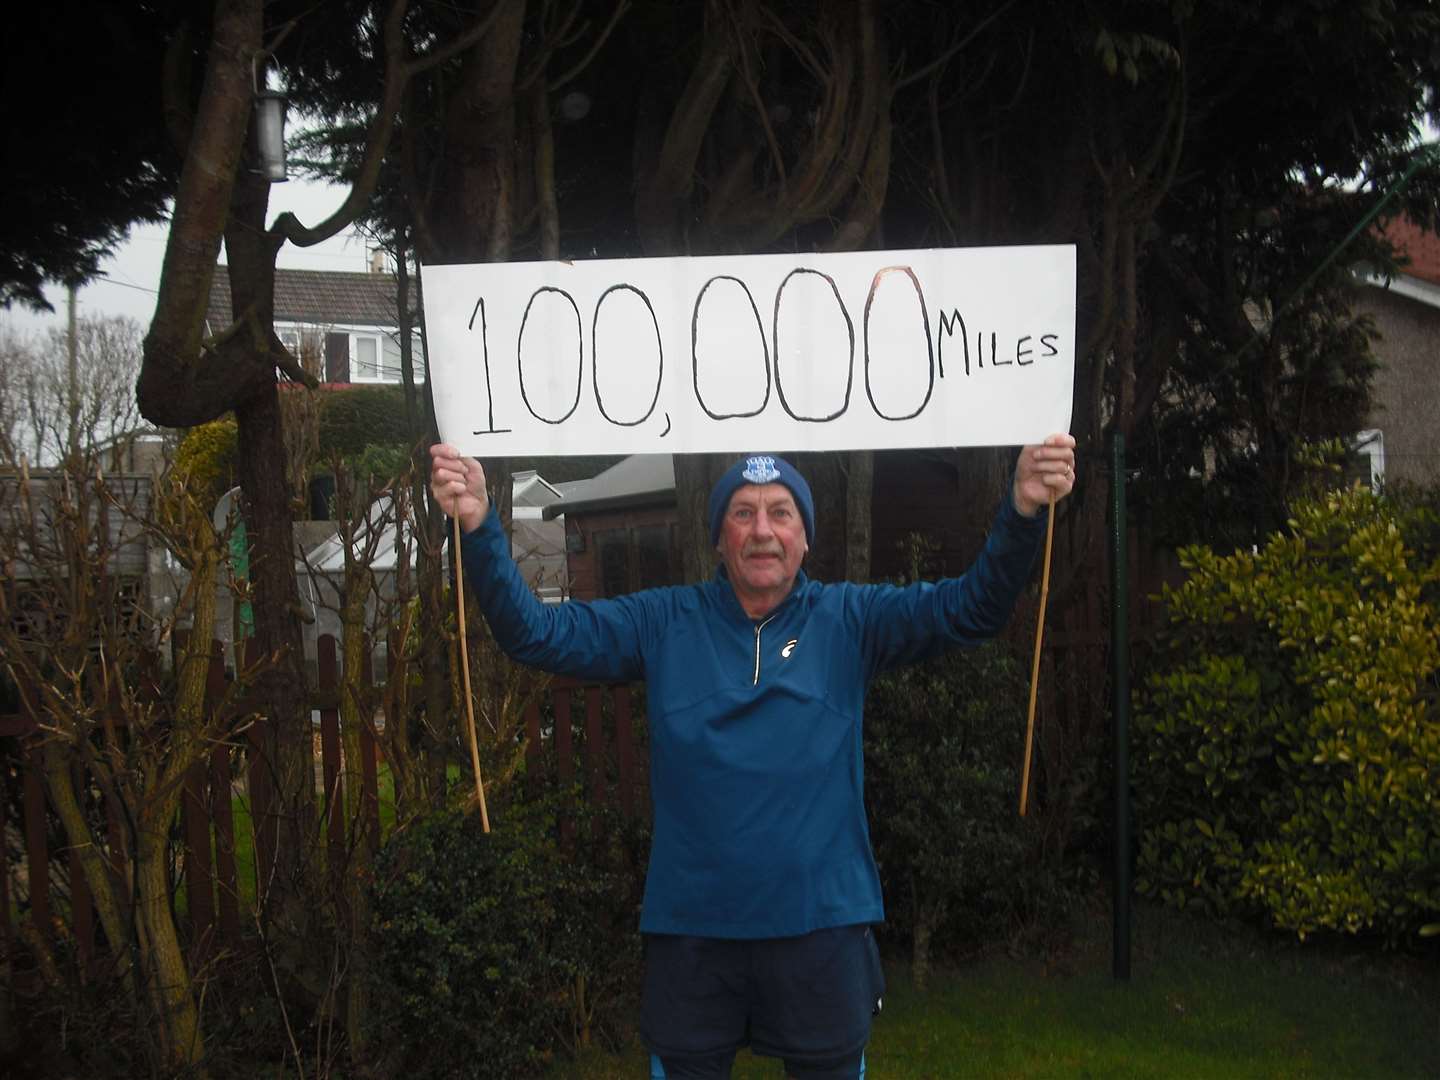 Stephen Cassells celebrates his completion of 100,000 miles running.